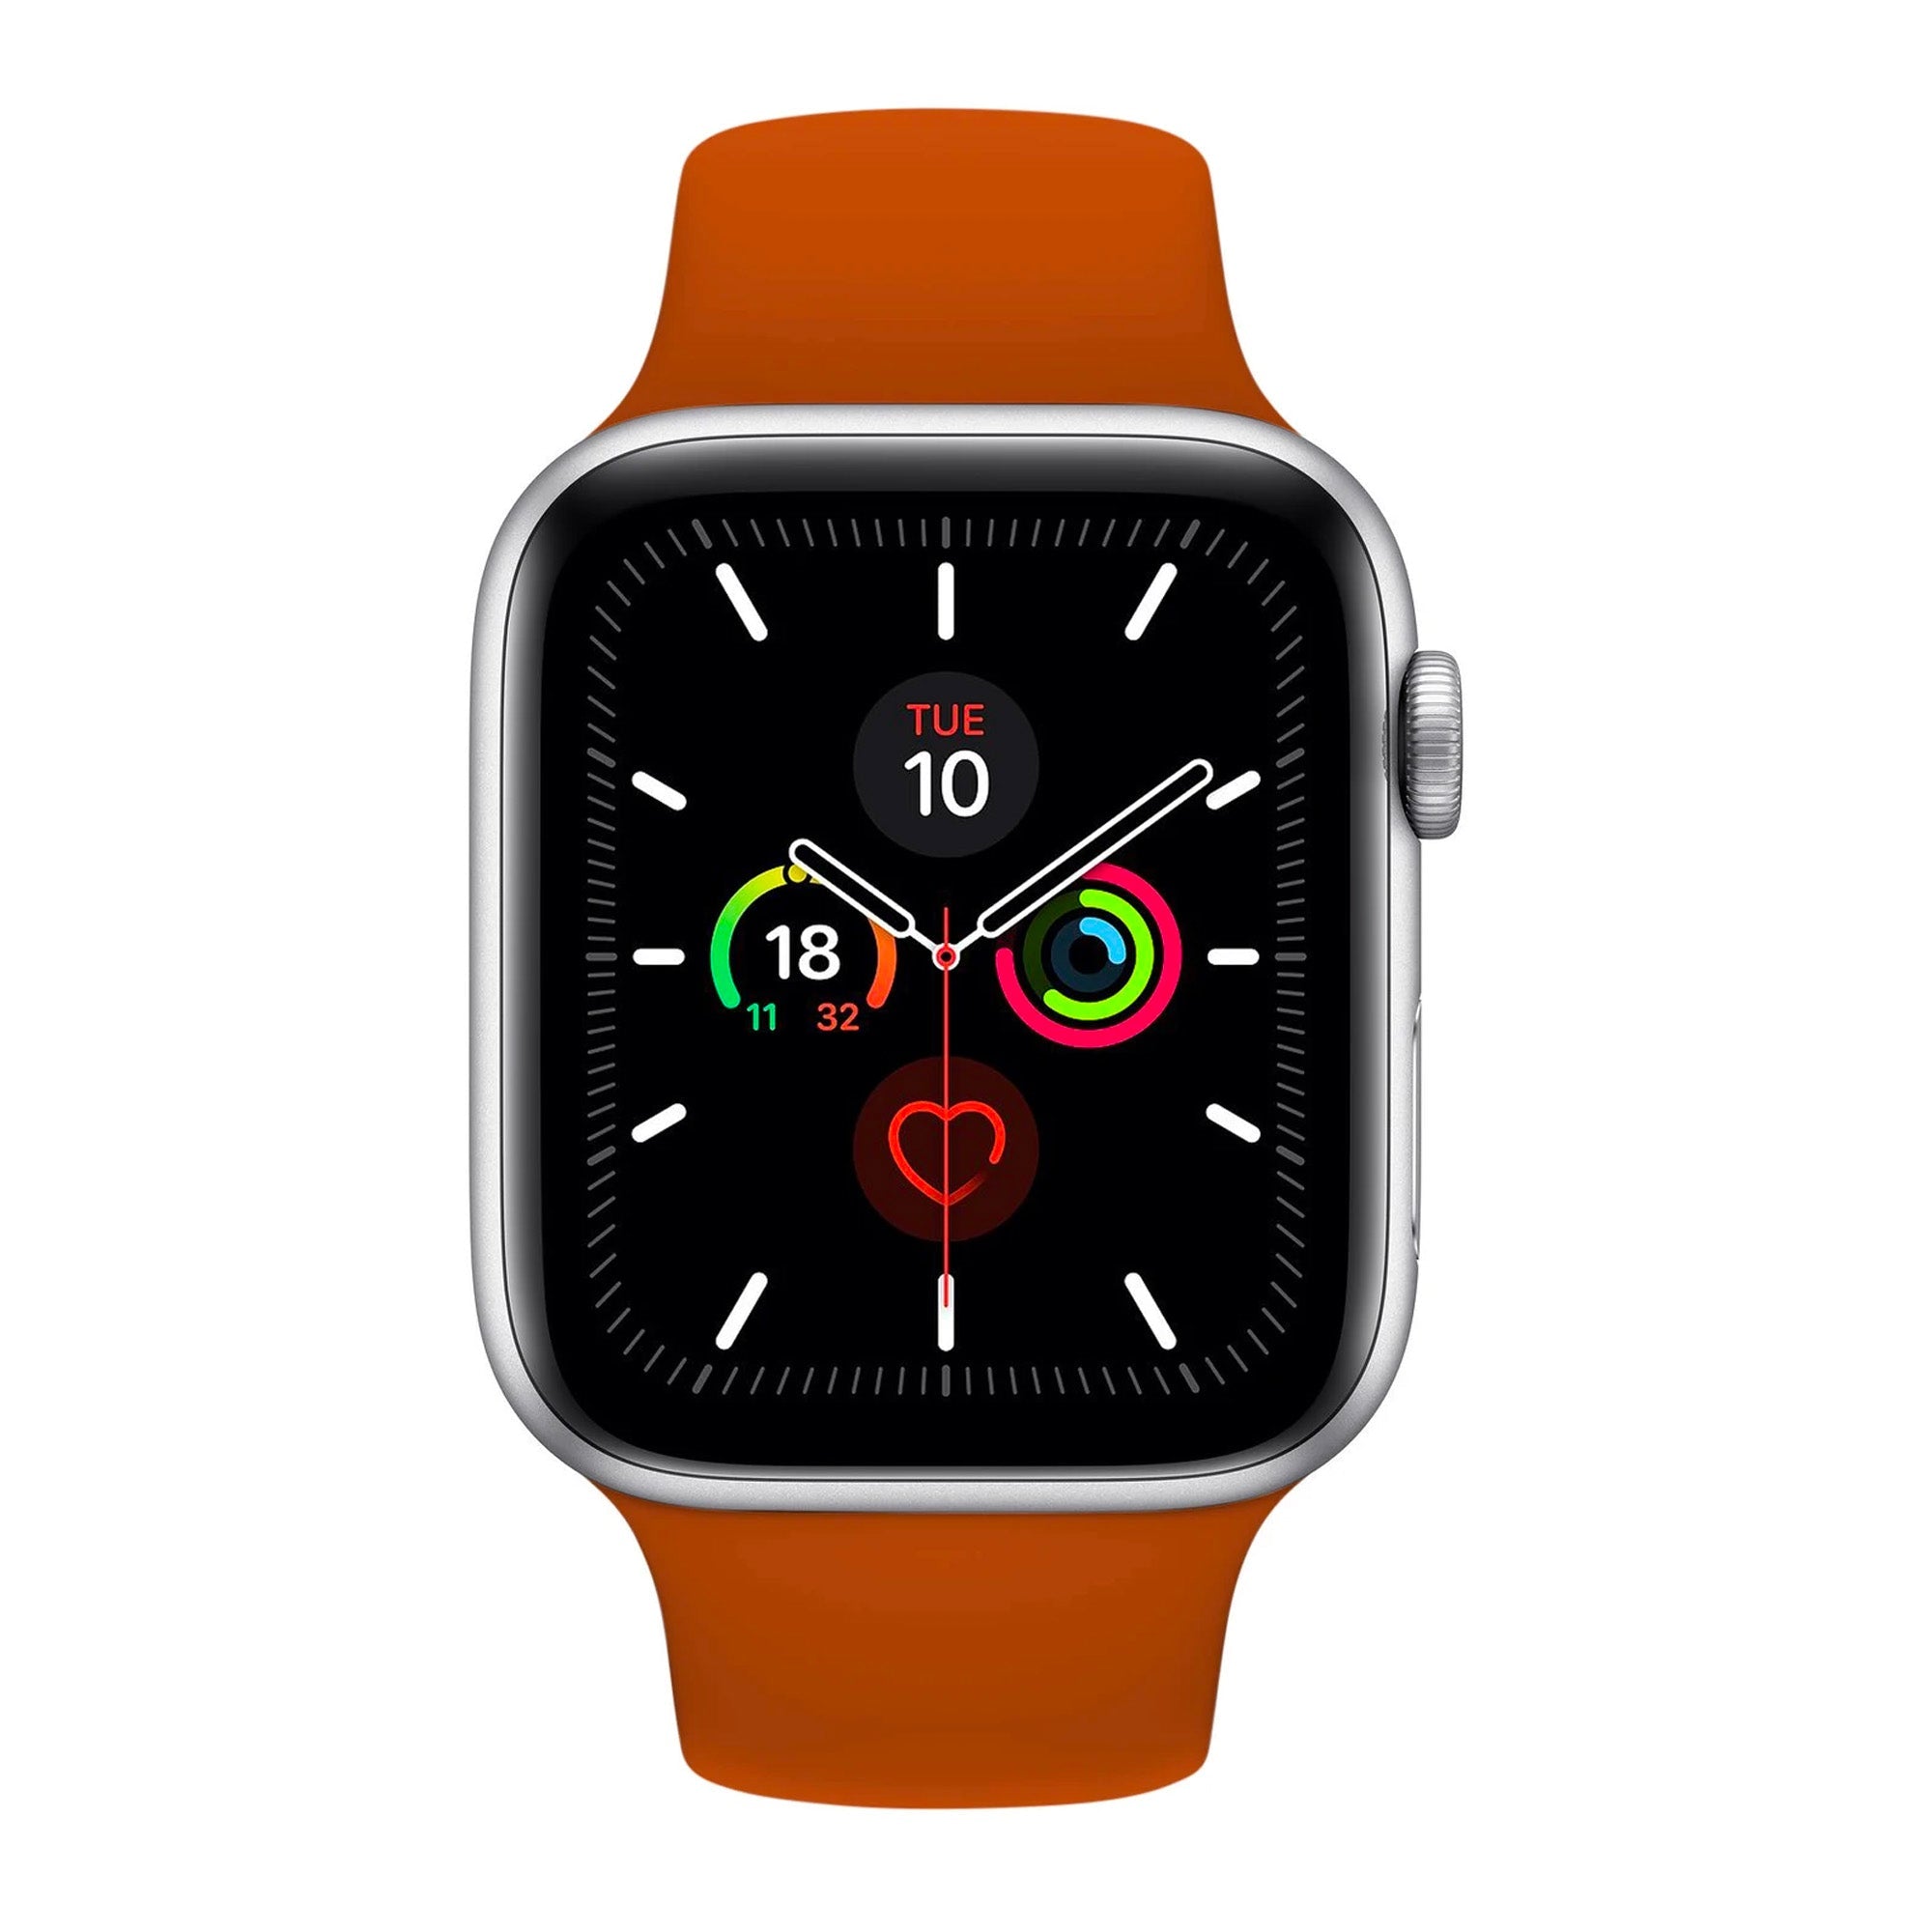 Burnt Orange Silicone Band for Apple Watch Silicone Bands   Accessories Gifts UK